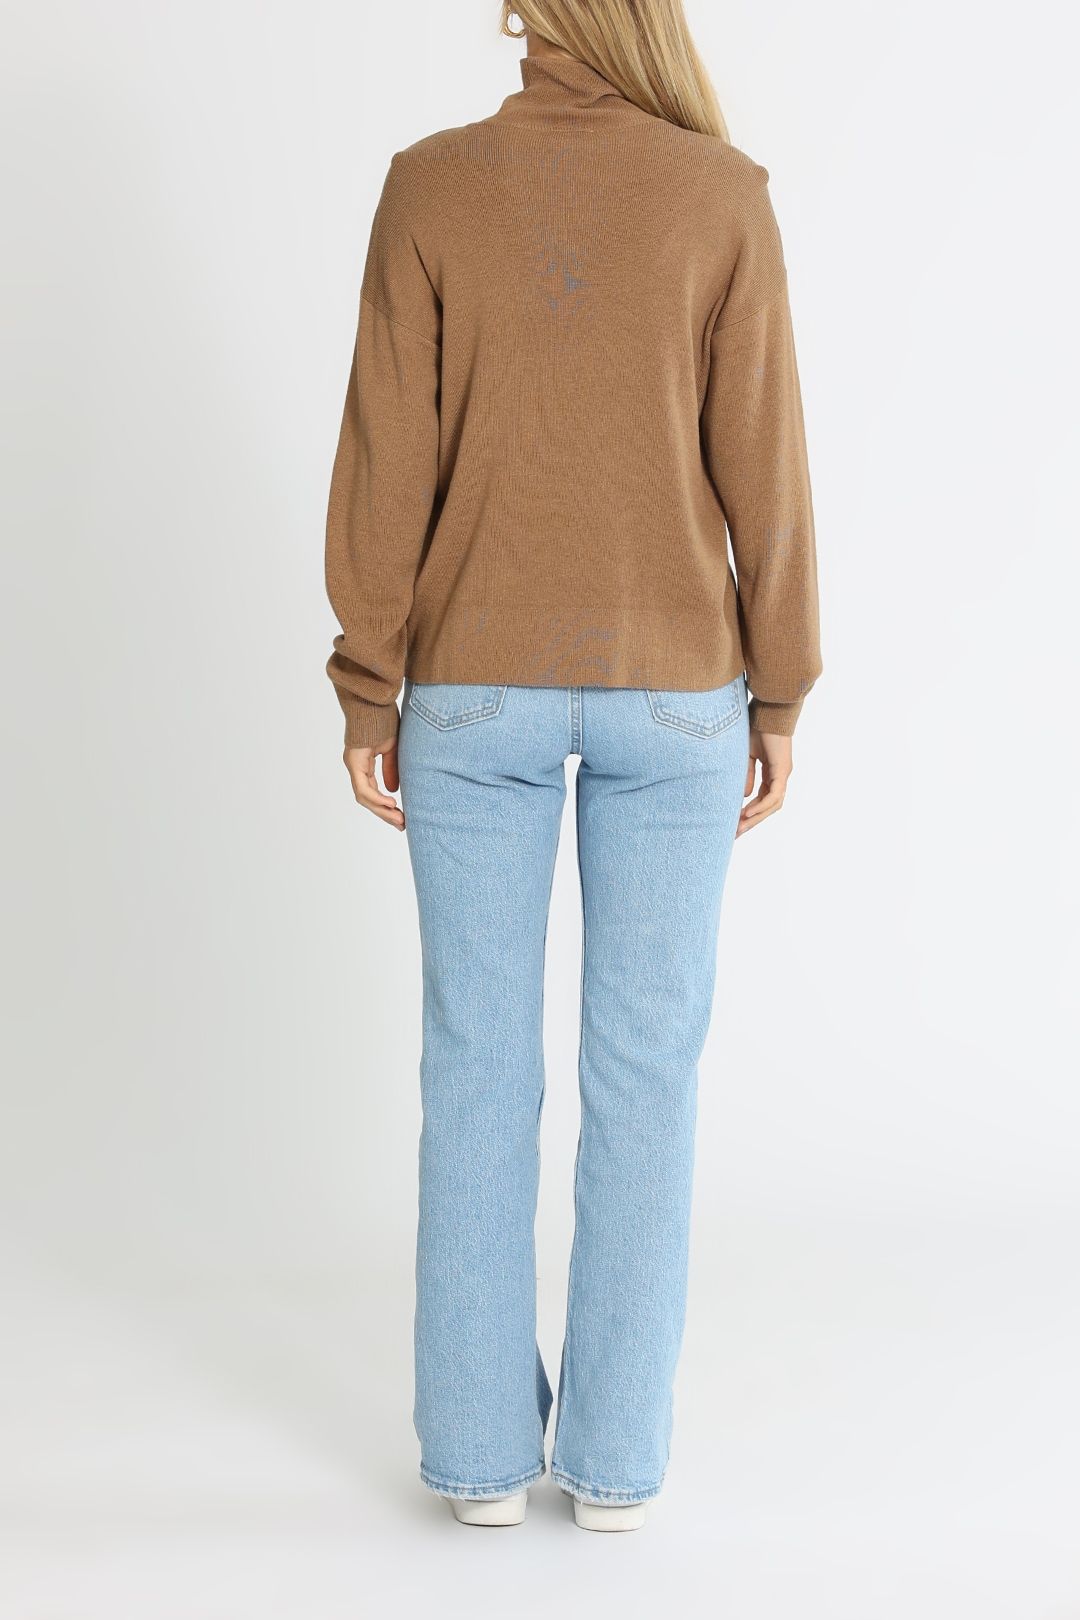 Elka Collective Paola Knit Camel Relaxed Fit